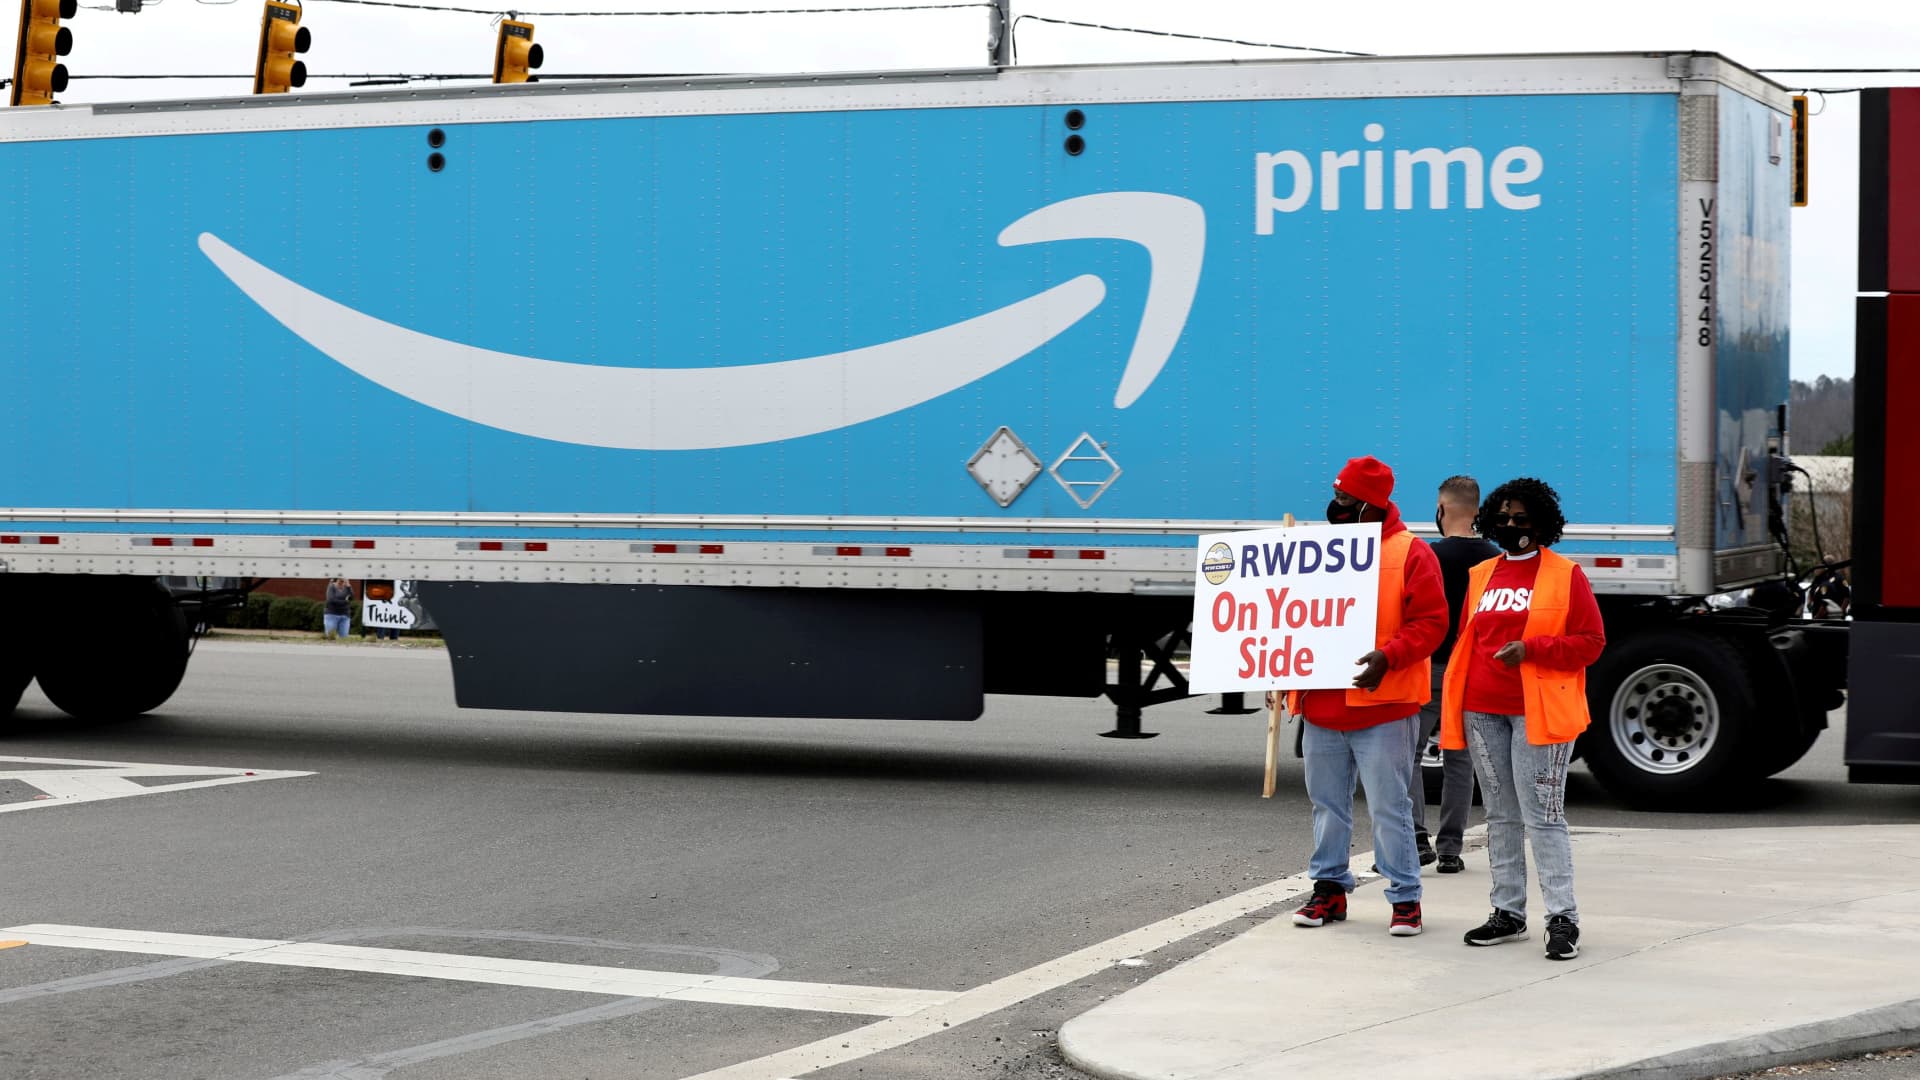 Amazon workers in Alabama reject union for second time, but challenged ballots remain